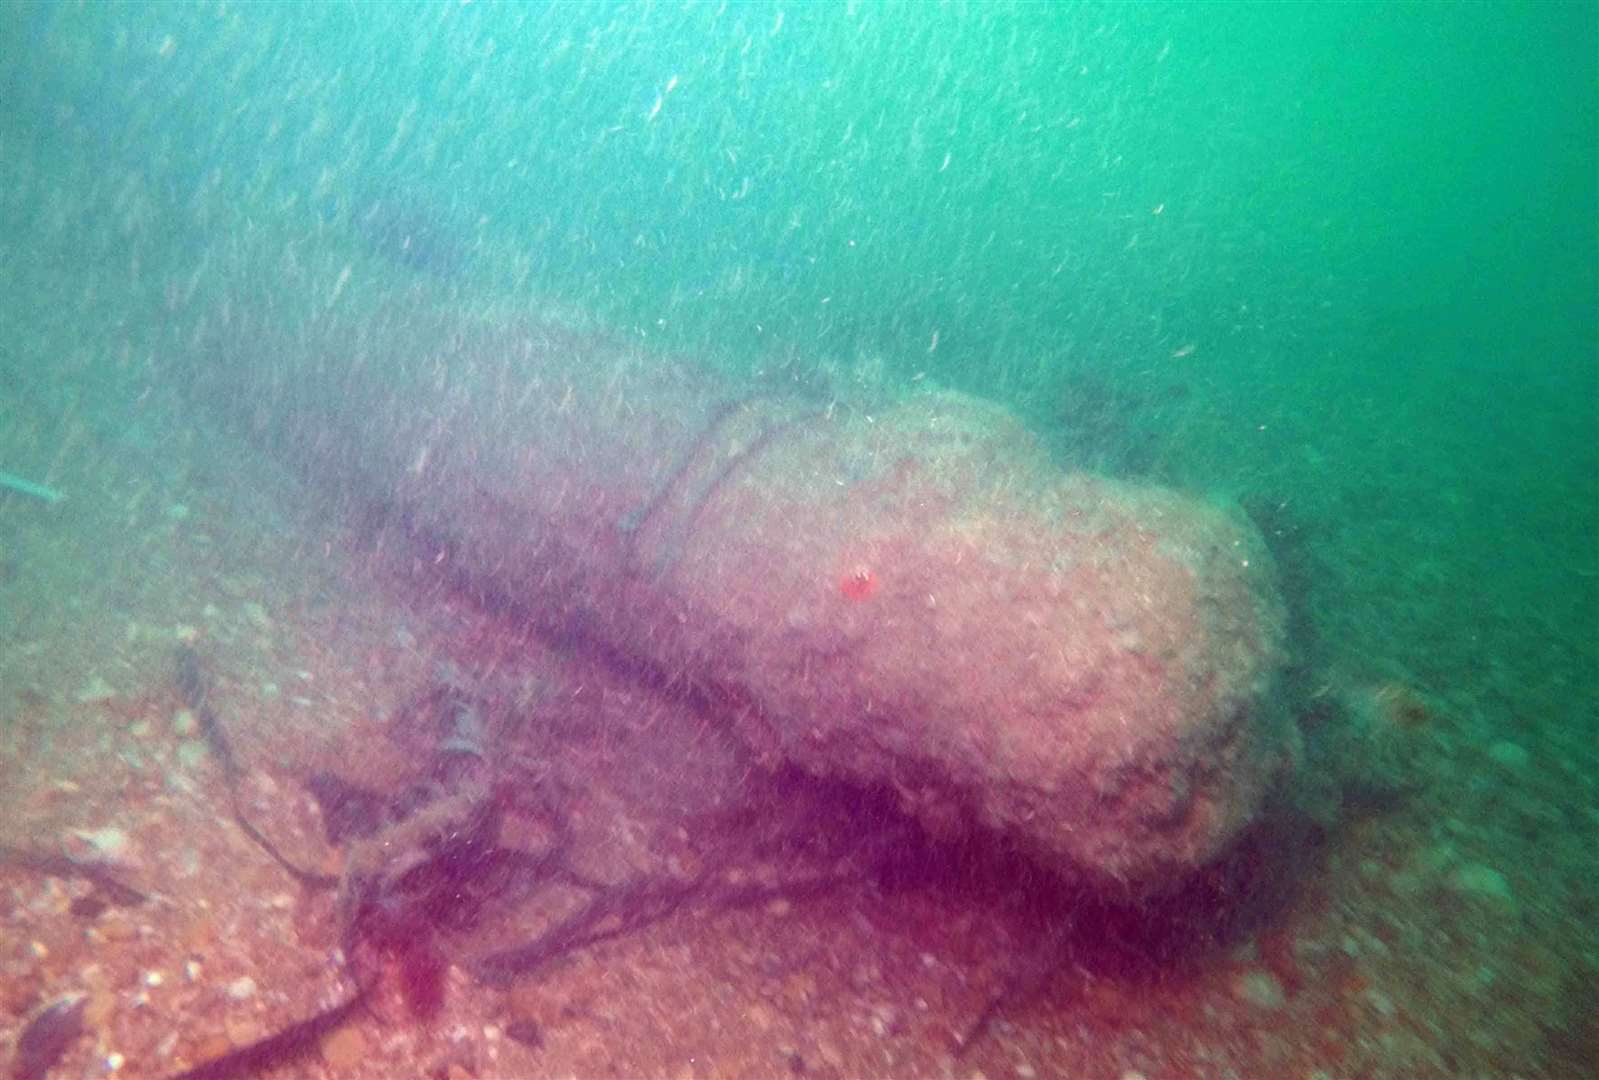 Cannon from HMS Restoration, which is on the 'at risk' list. Photo: Dr Doug McElvogue